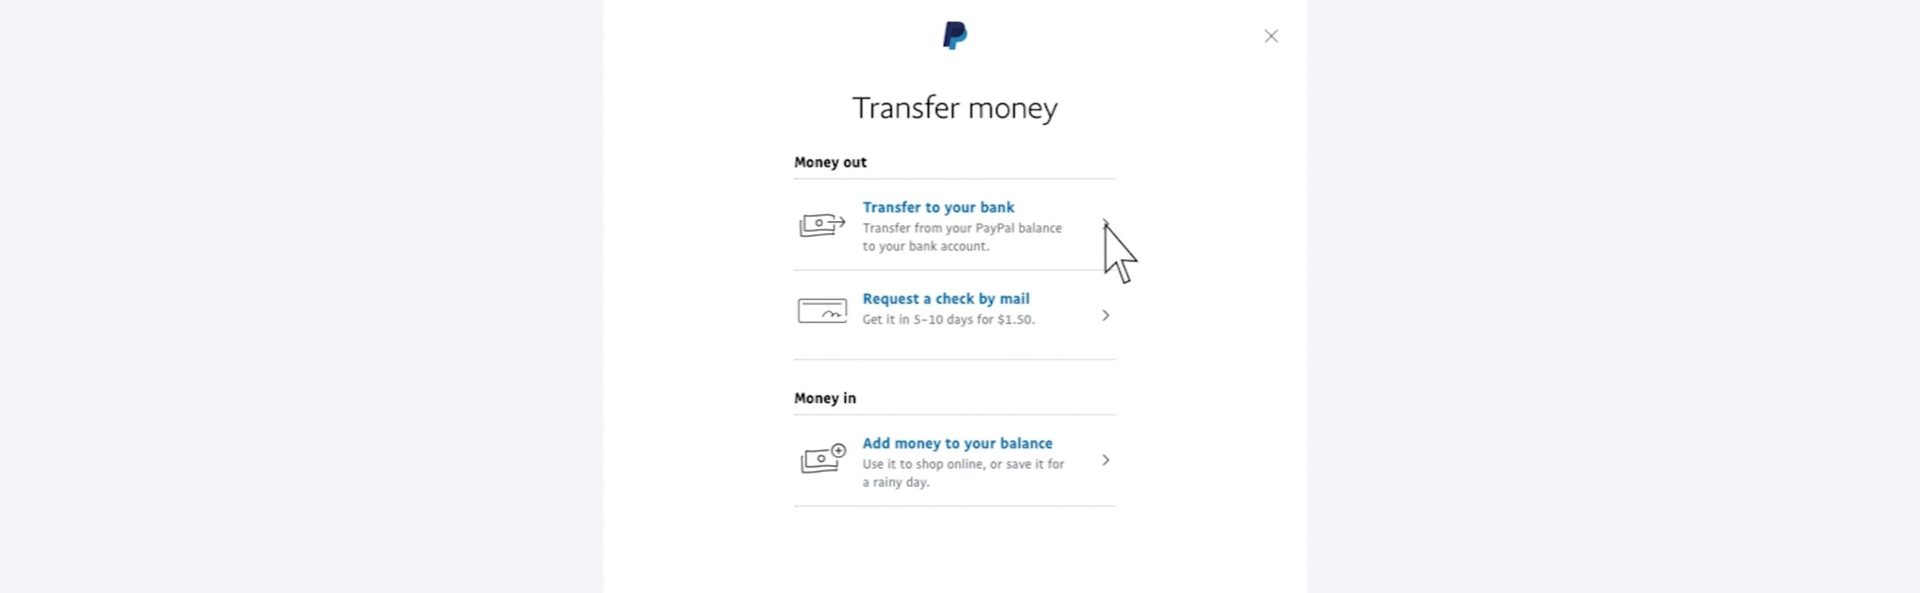 paypal transfer money to bank account from website 2